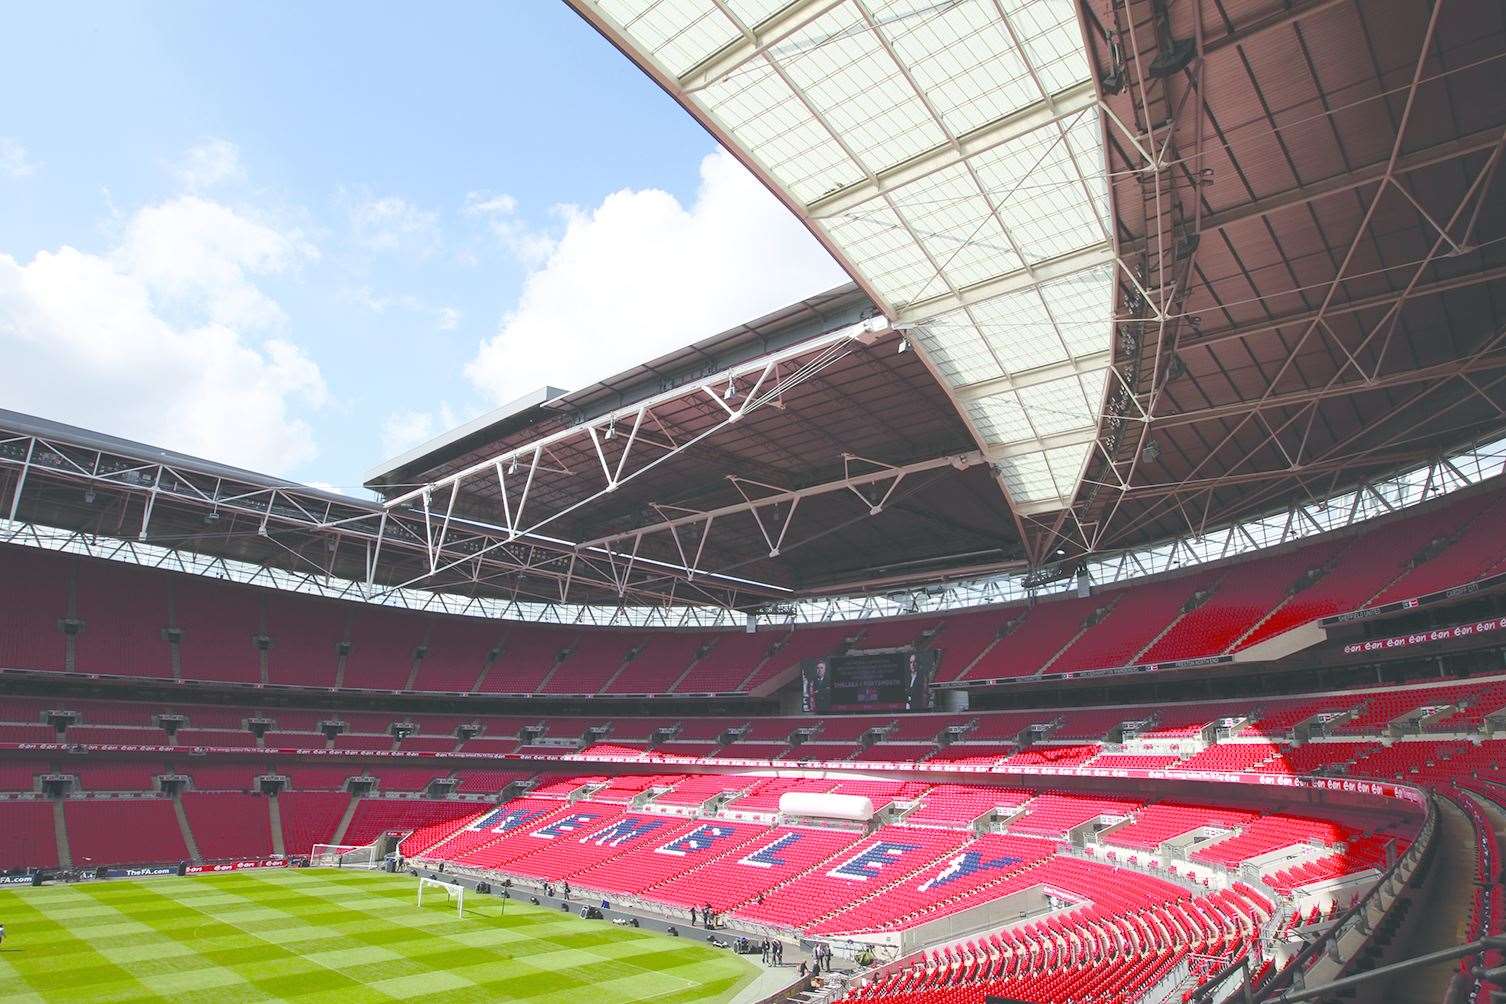 Spectators will not return to sporting events at places like Wembley Stadium. Stock picture